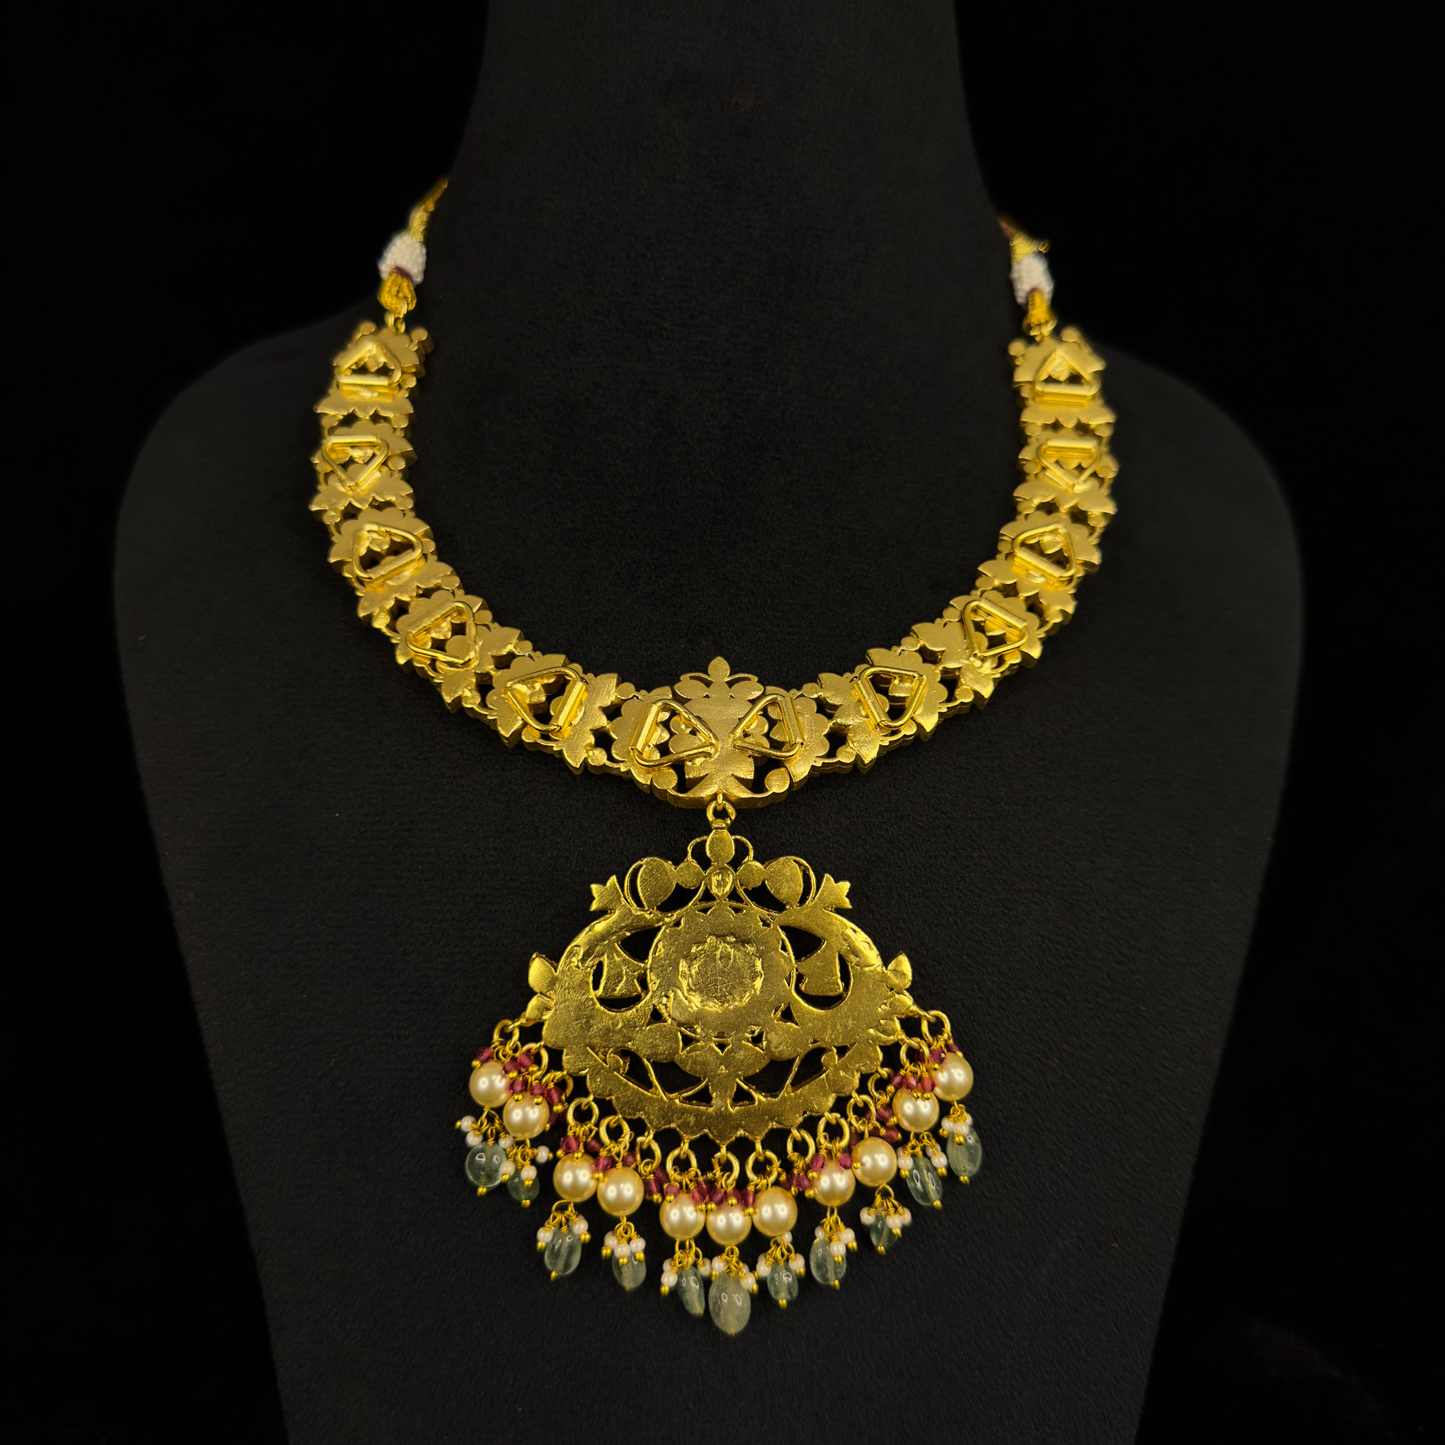 Ornate Splendor: Exquisite Jadau Kundan Necklace with Pearl Adornments with 22k gold plating This product belongs to jadau kundan jewellery category